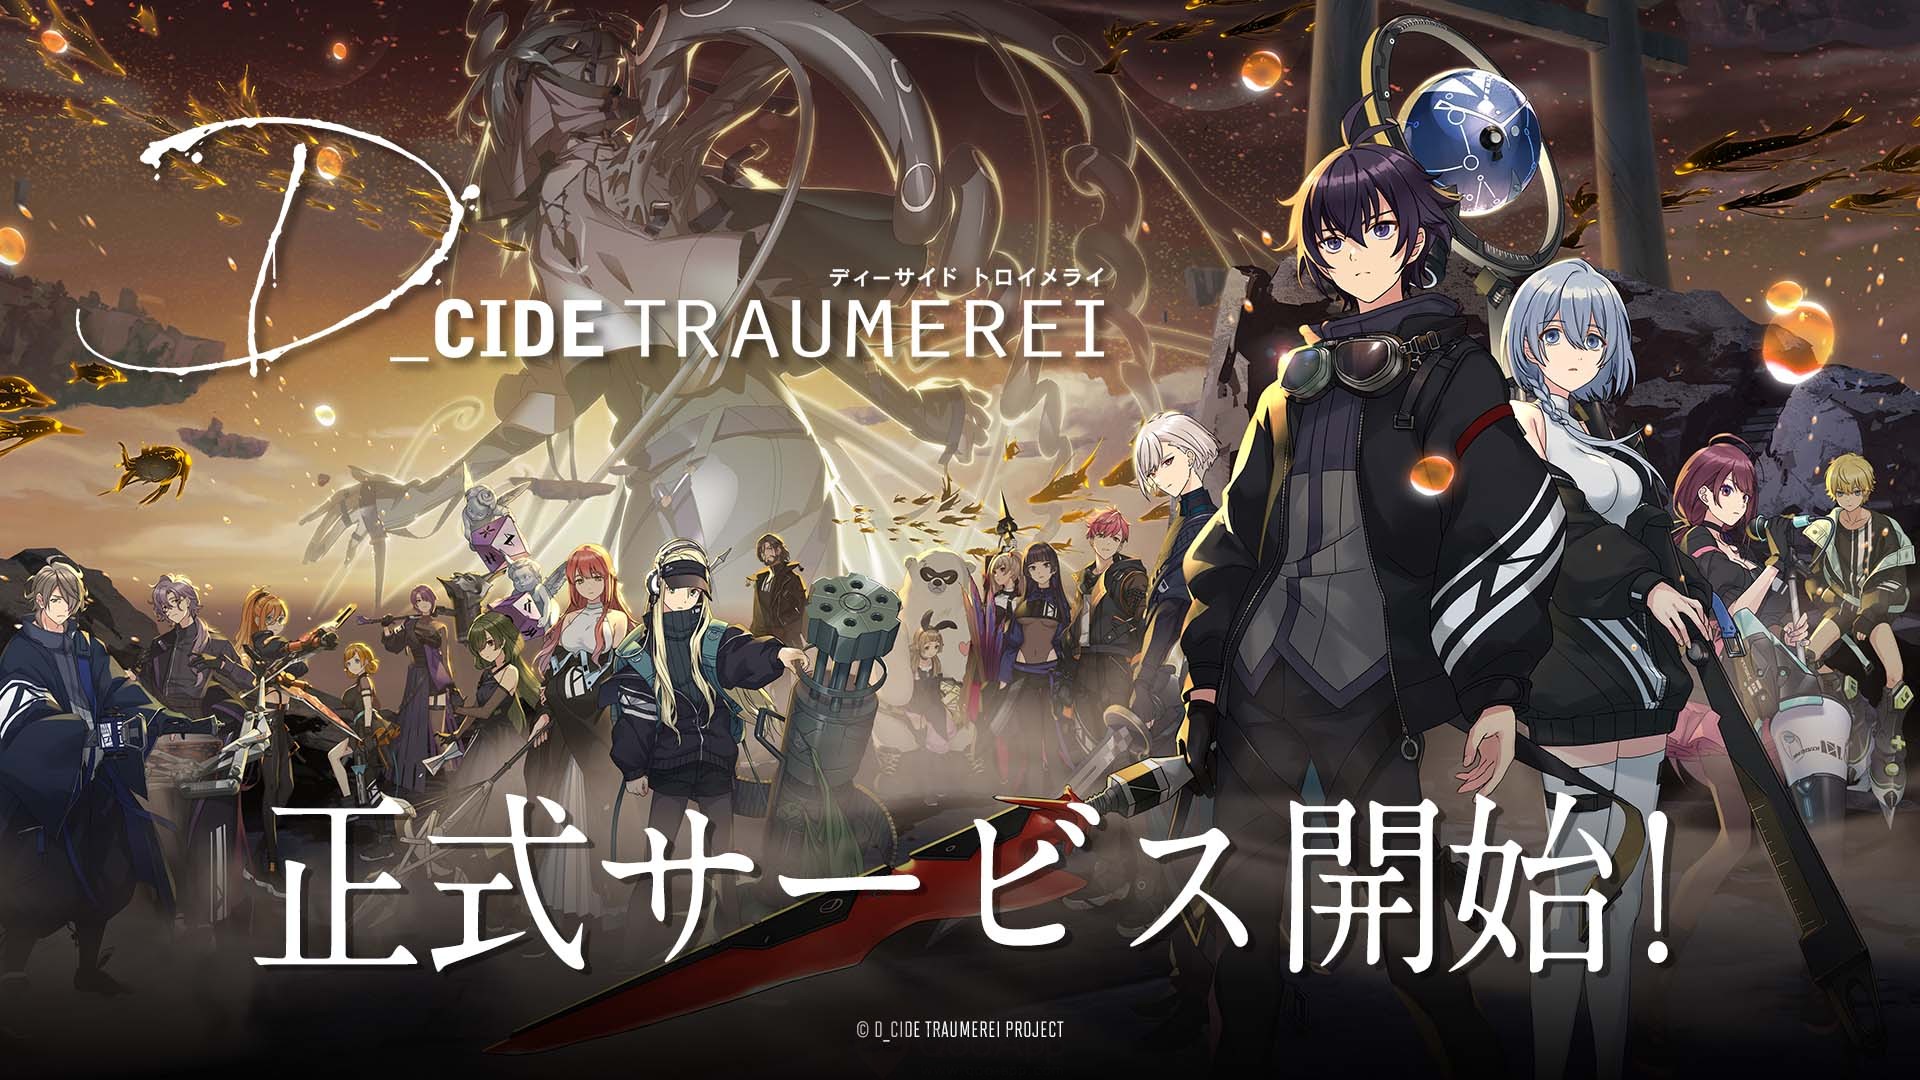 D_Cide Traumerei Mobile Game Now Goes Live! Login to Obtain 4-Star Astra Record!